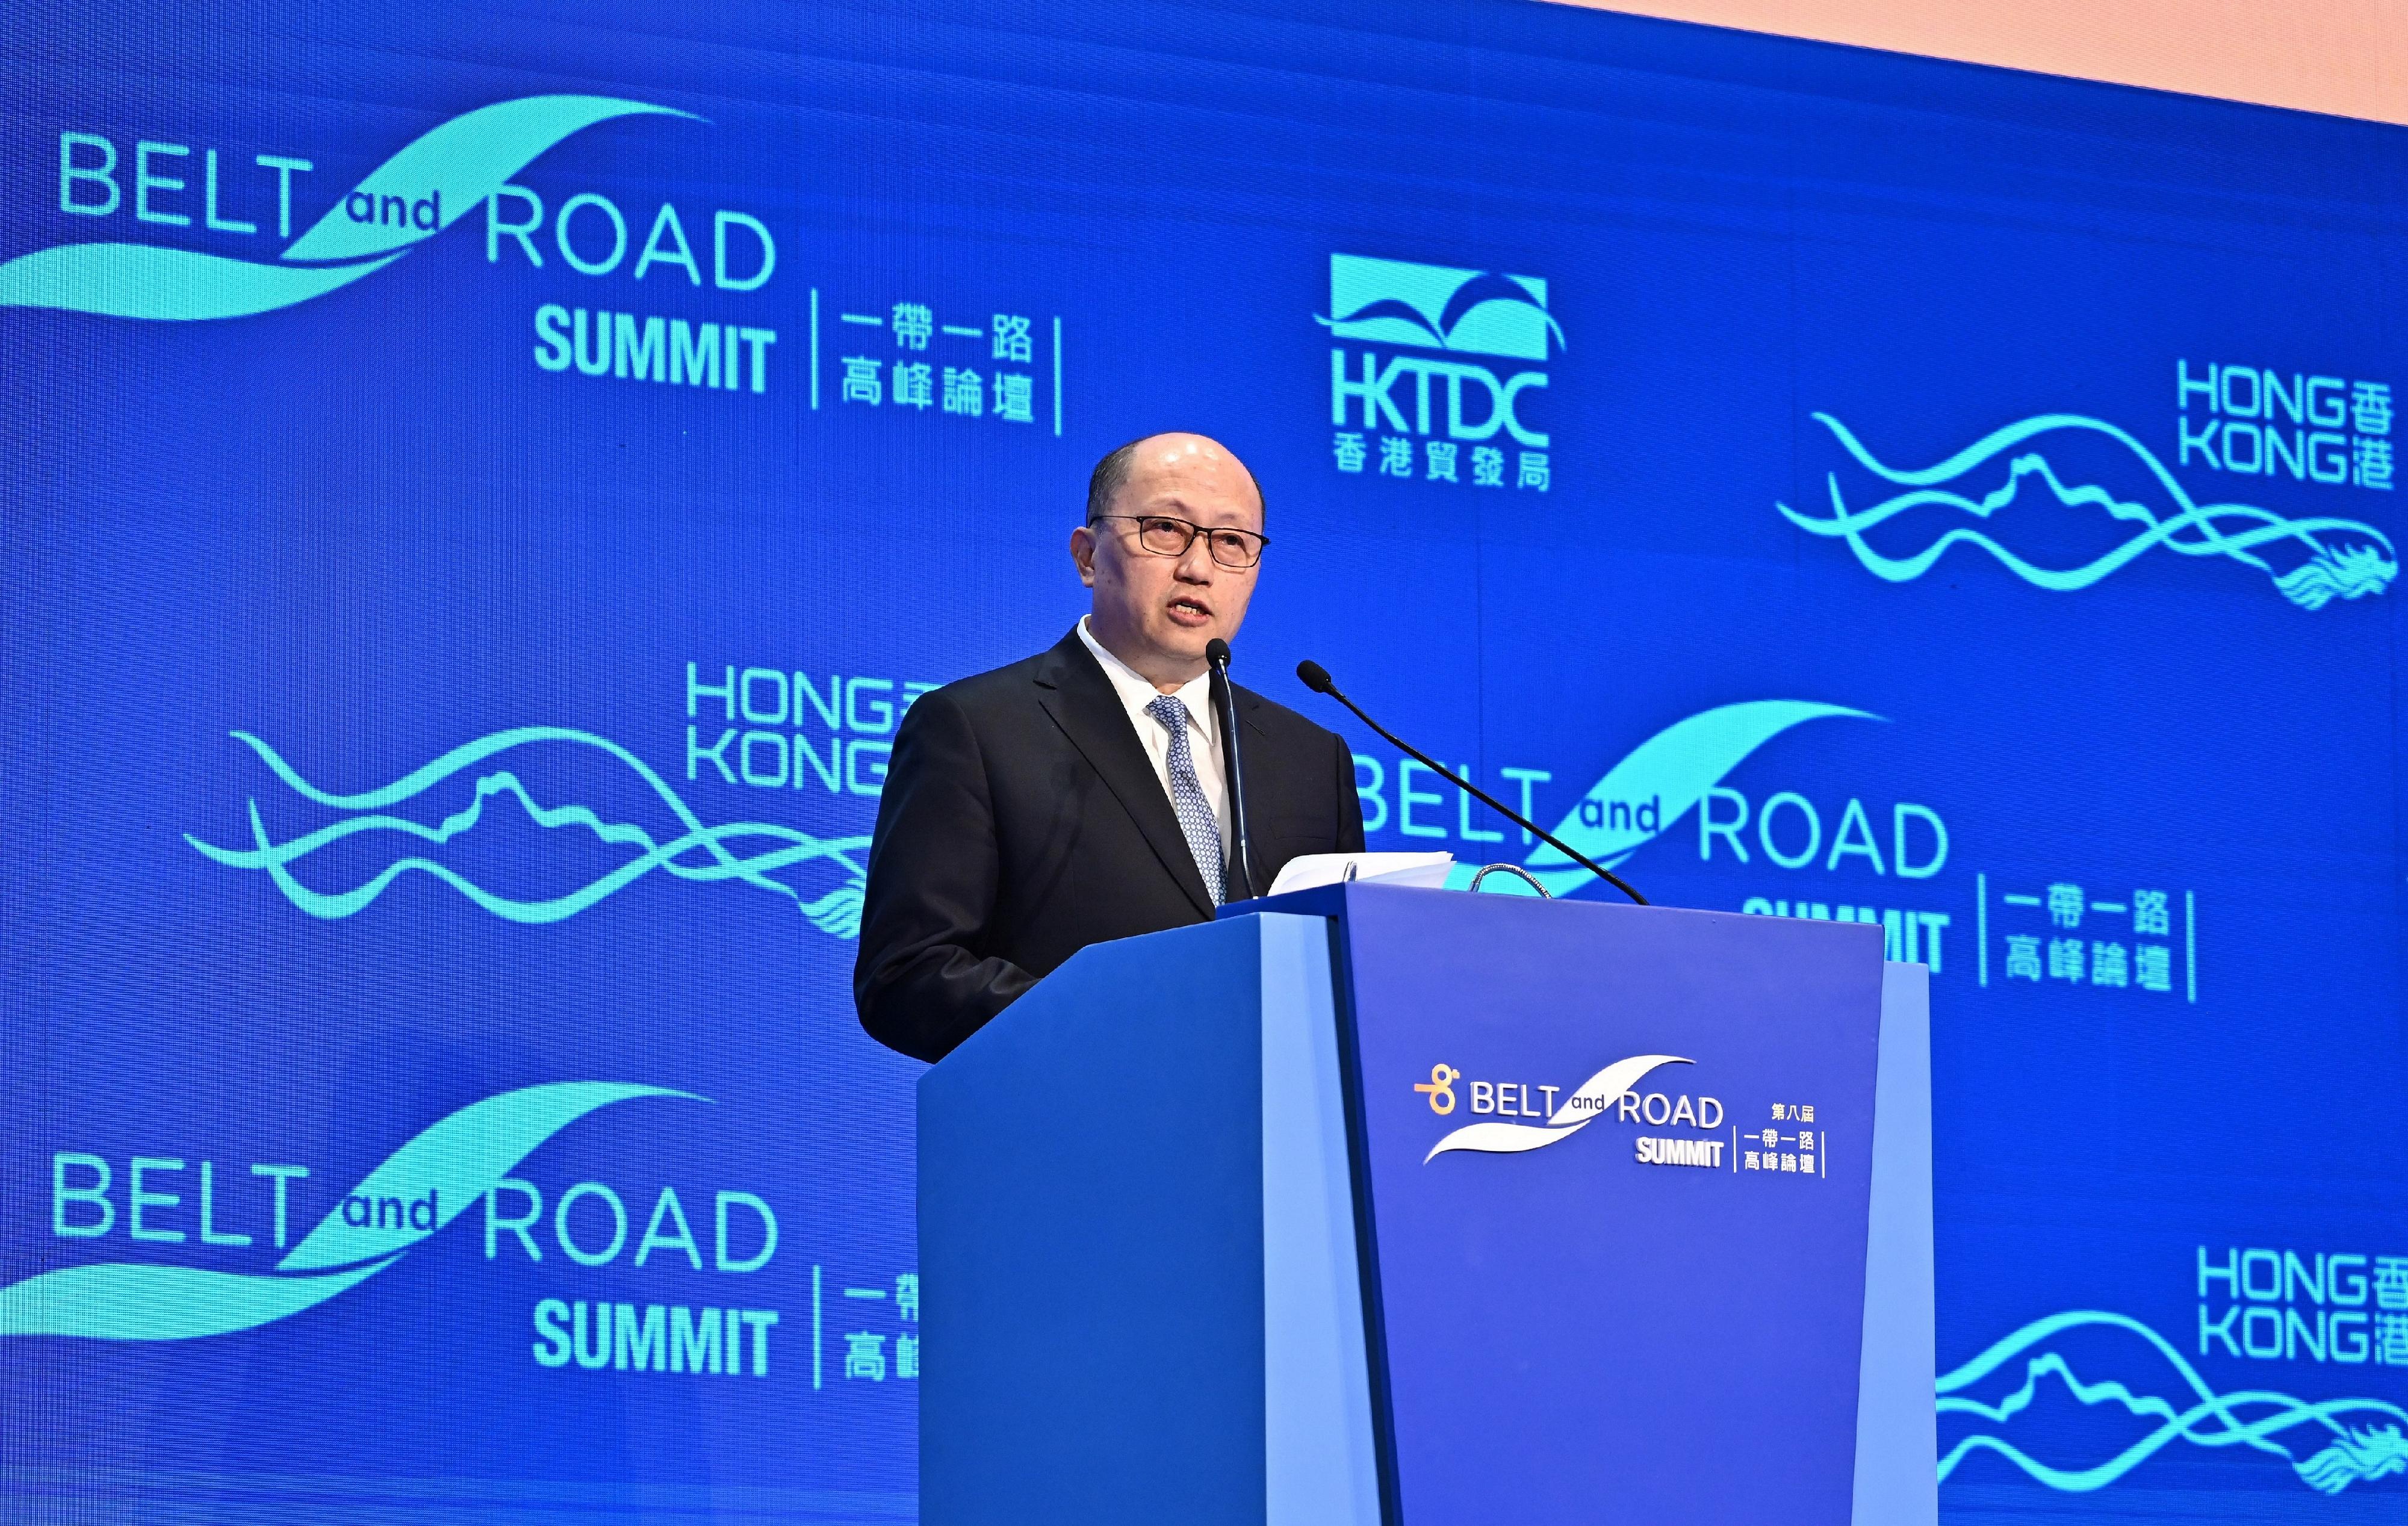 The eighth Belt and Road Summit opened today (September 13). Deputy Director of the Hong Kong and Macao Affairs Office of the State Council, and the Director of the Liaison Office of the Central People's Government in the Hong Kong Special Administrative Region, Mr Zheng Yanxiong, delivered a special address at the session.